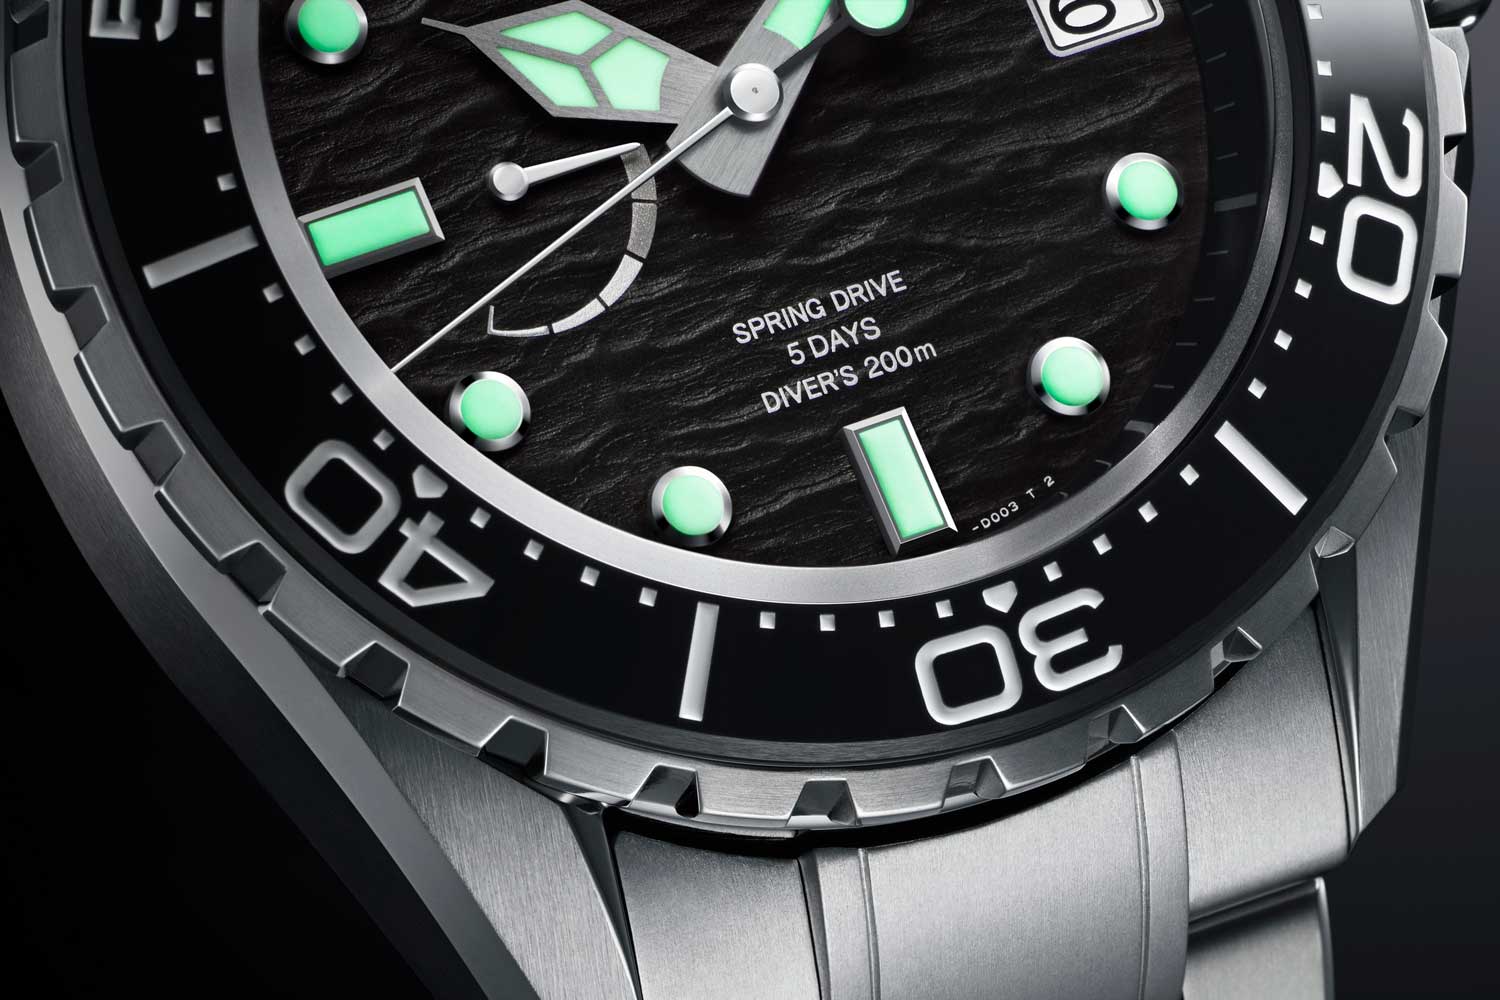 On closer inspection, there’s nothing plain about this marine-inspired black dial